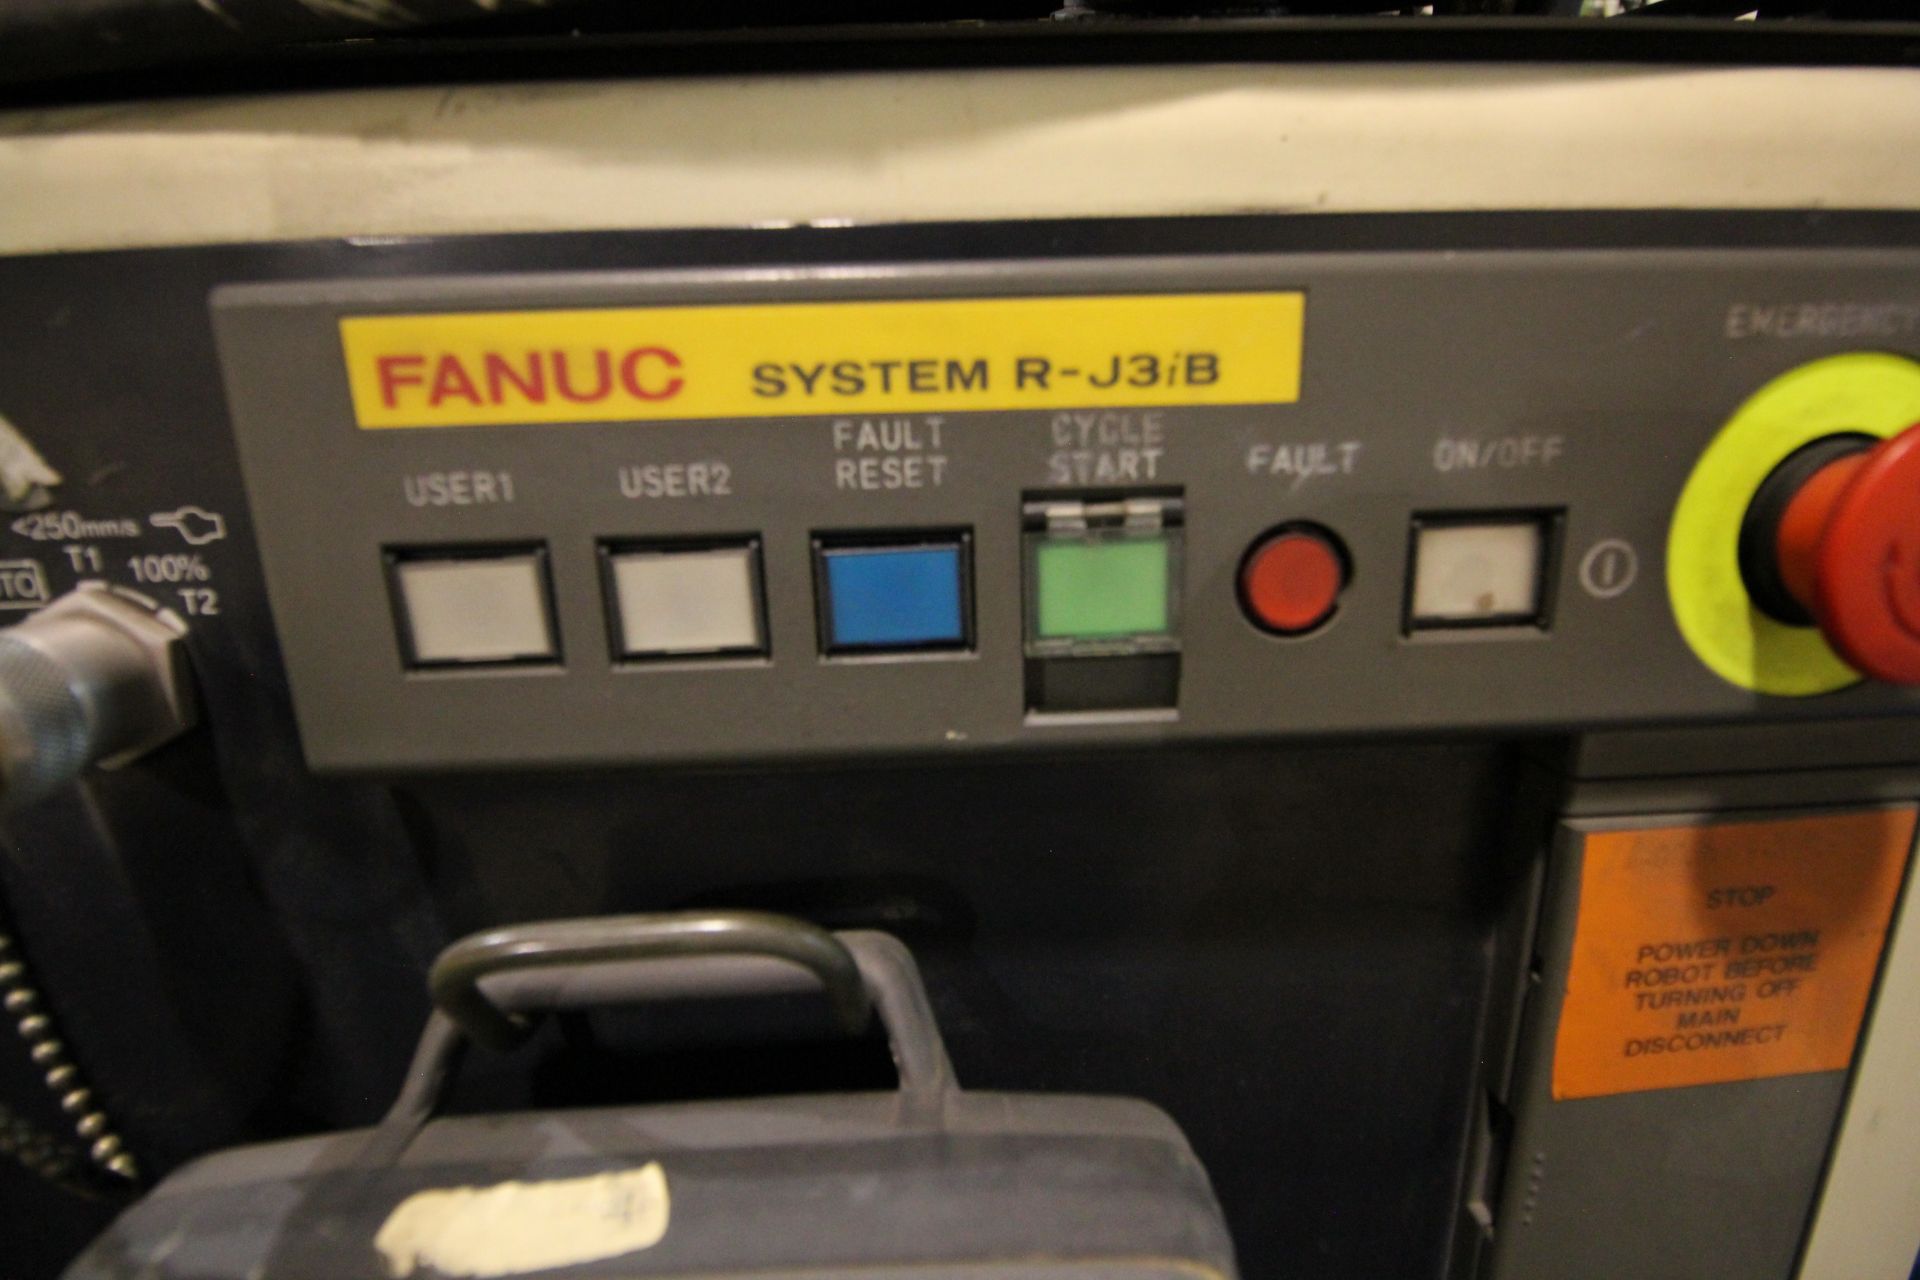 ﻿FANUC ROBOT S-500iB WITH R-J3iB CONTROLS, TEACH PENDANT & CABLES, YEAR 2002, SN 54982 - Image 7 of 7